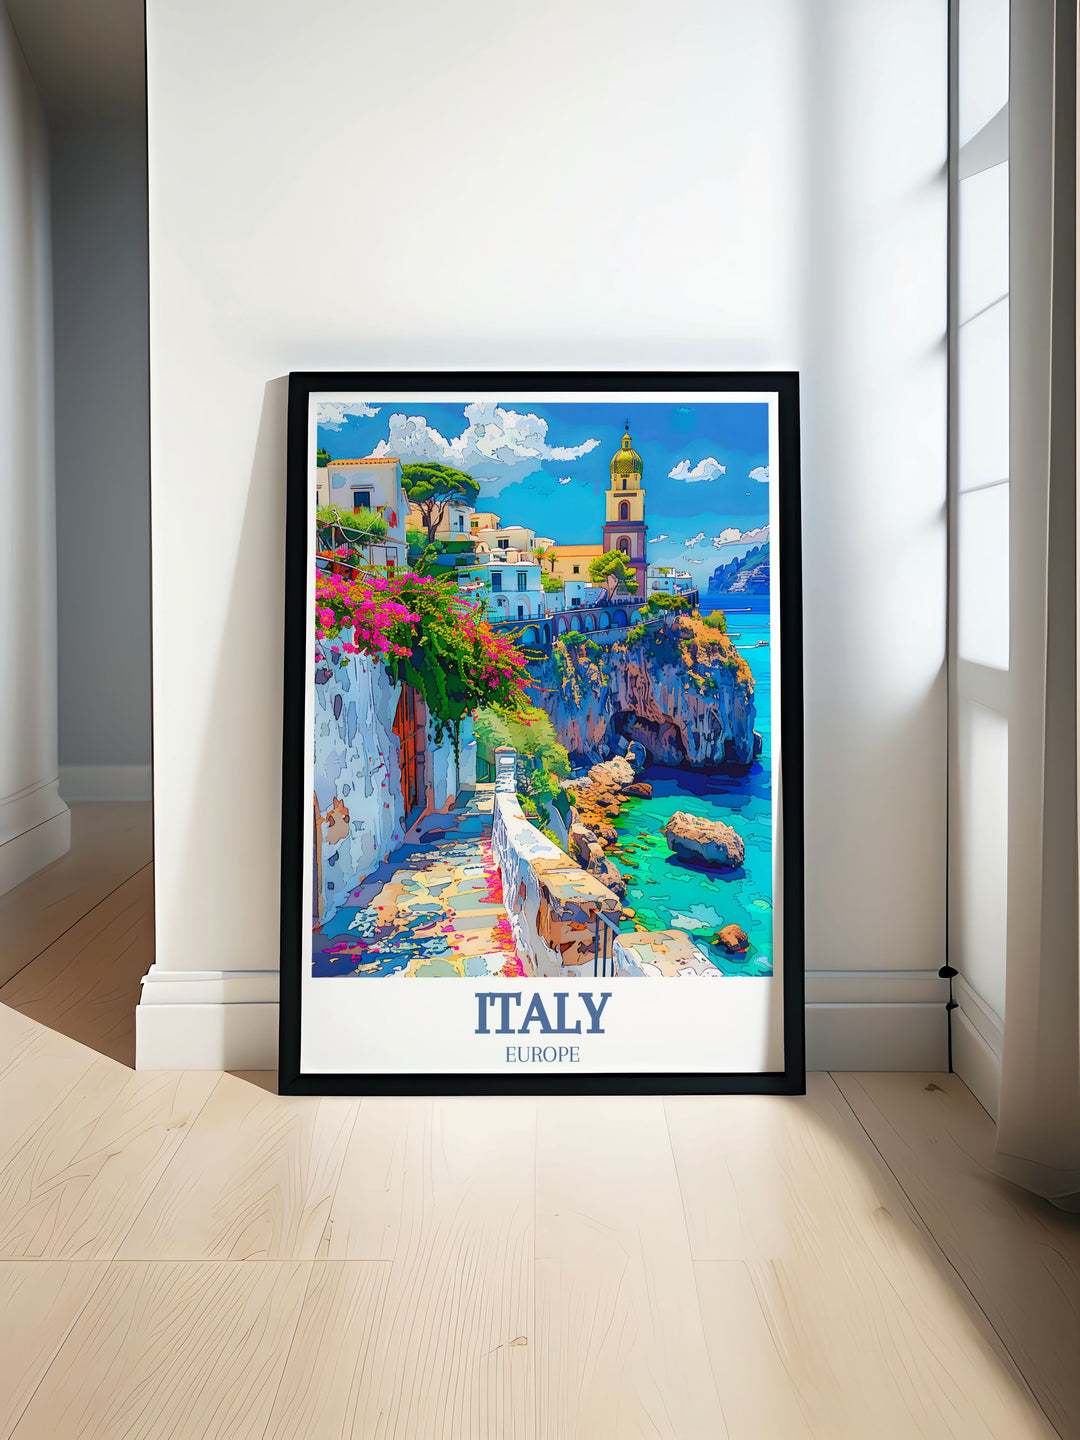 This travel poster captures the picturesque Amalfi Coast and the historic Campanile Bell Tower, highlighting the stunning coastal scenery and architectural beauty of Italy, perfect for home decor enthusiasts.